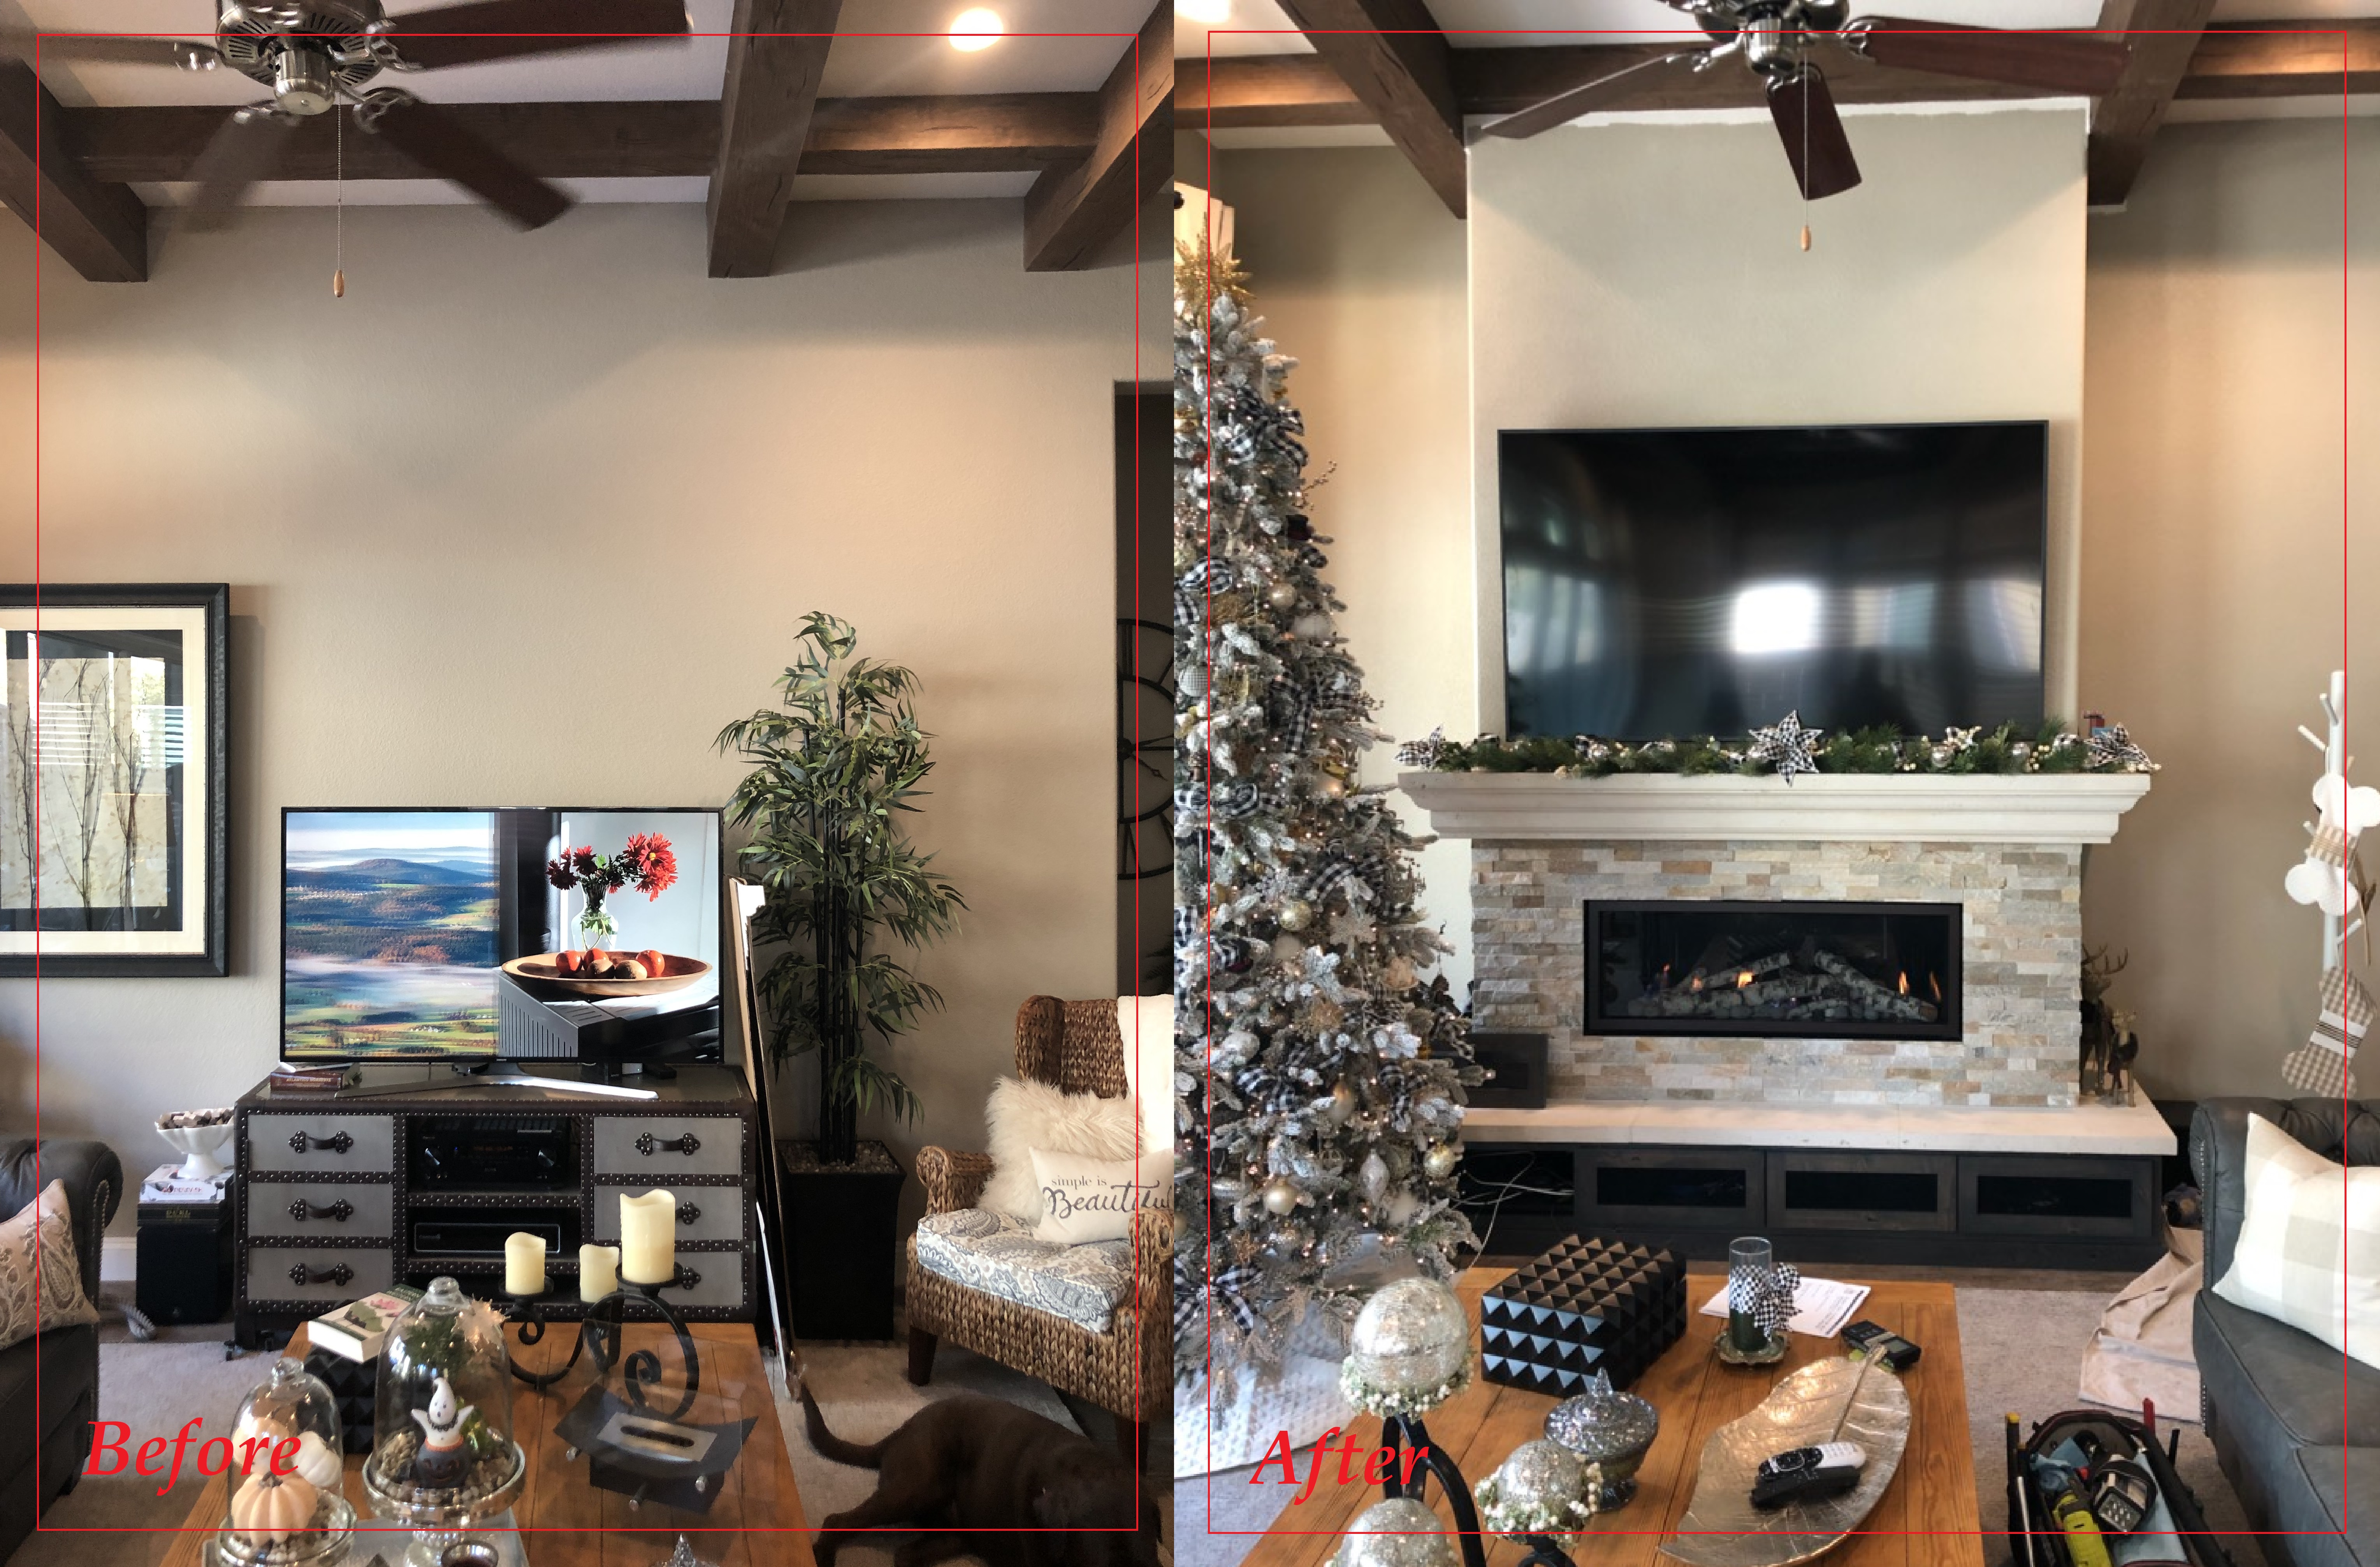 A fireplace in a living room that was installed by Pacific Hearth & Home, Inc. in Rancho Cordova, CA